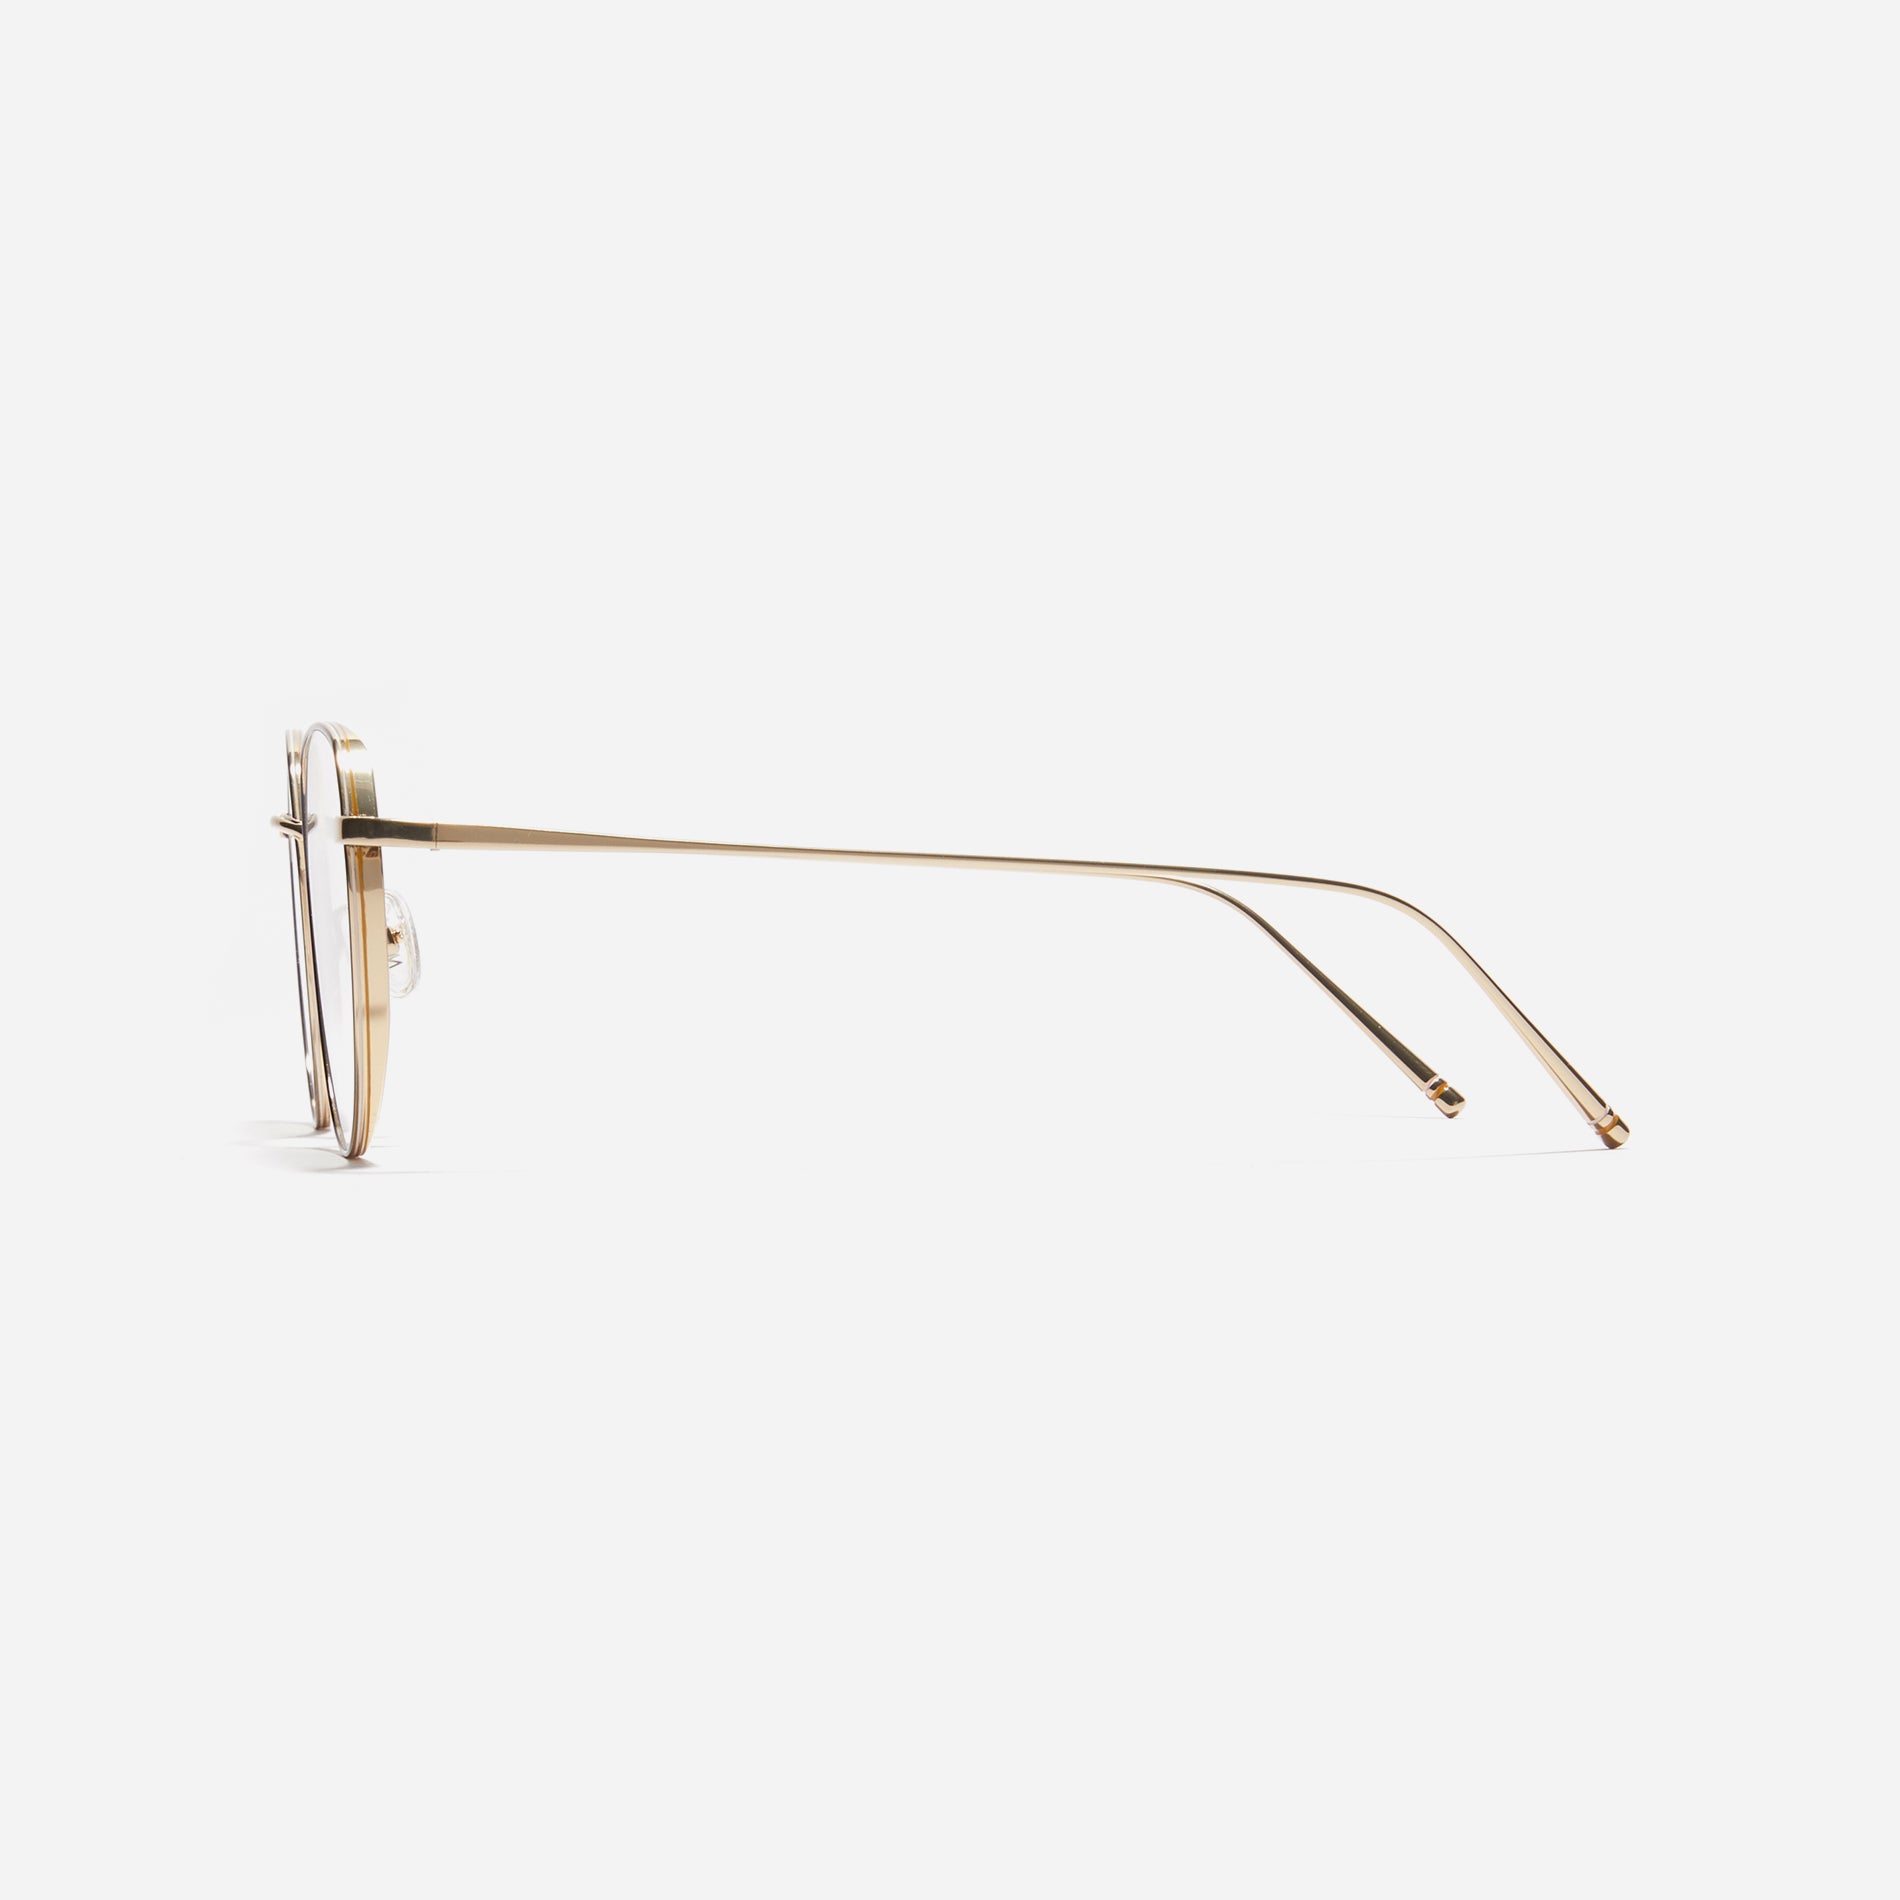 Gus P are polygonal-shaped, full-metal eyeglasses with a dual-rim structure designed to accommodate thicker, high-prescription lenses. Both the frame and temples are made of pure titanium, ensuring a lightweight and comfortable fit.